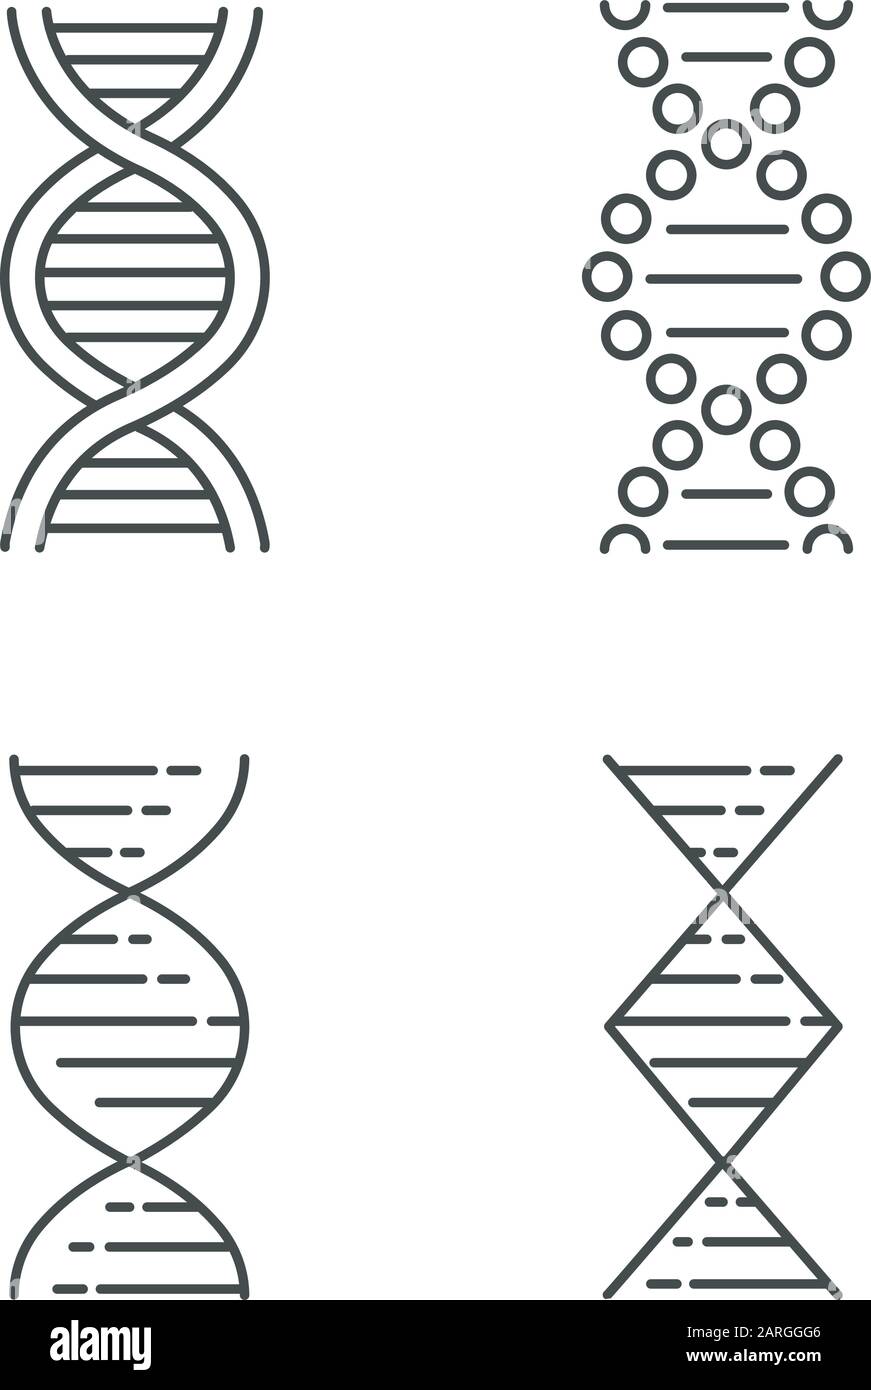 DNA spiral strands linear icons set. Deoxyribonucleic, nucleic acid helix. Molecular biology. Genetic code. Genetics. Thin line contour symbols. Isola Stock Vector